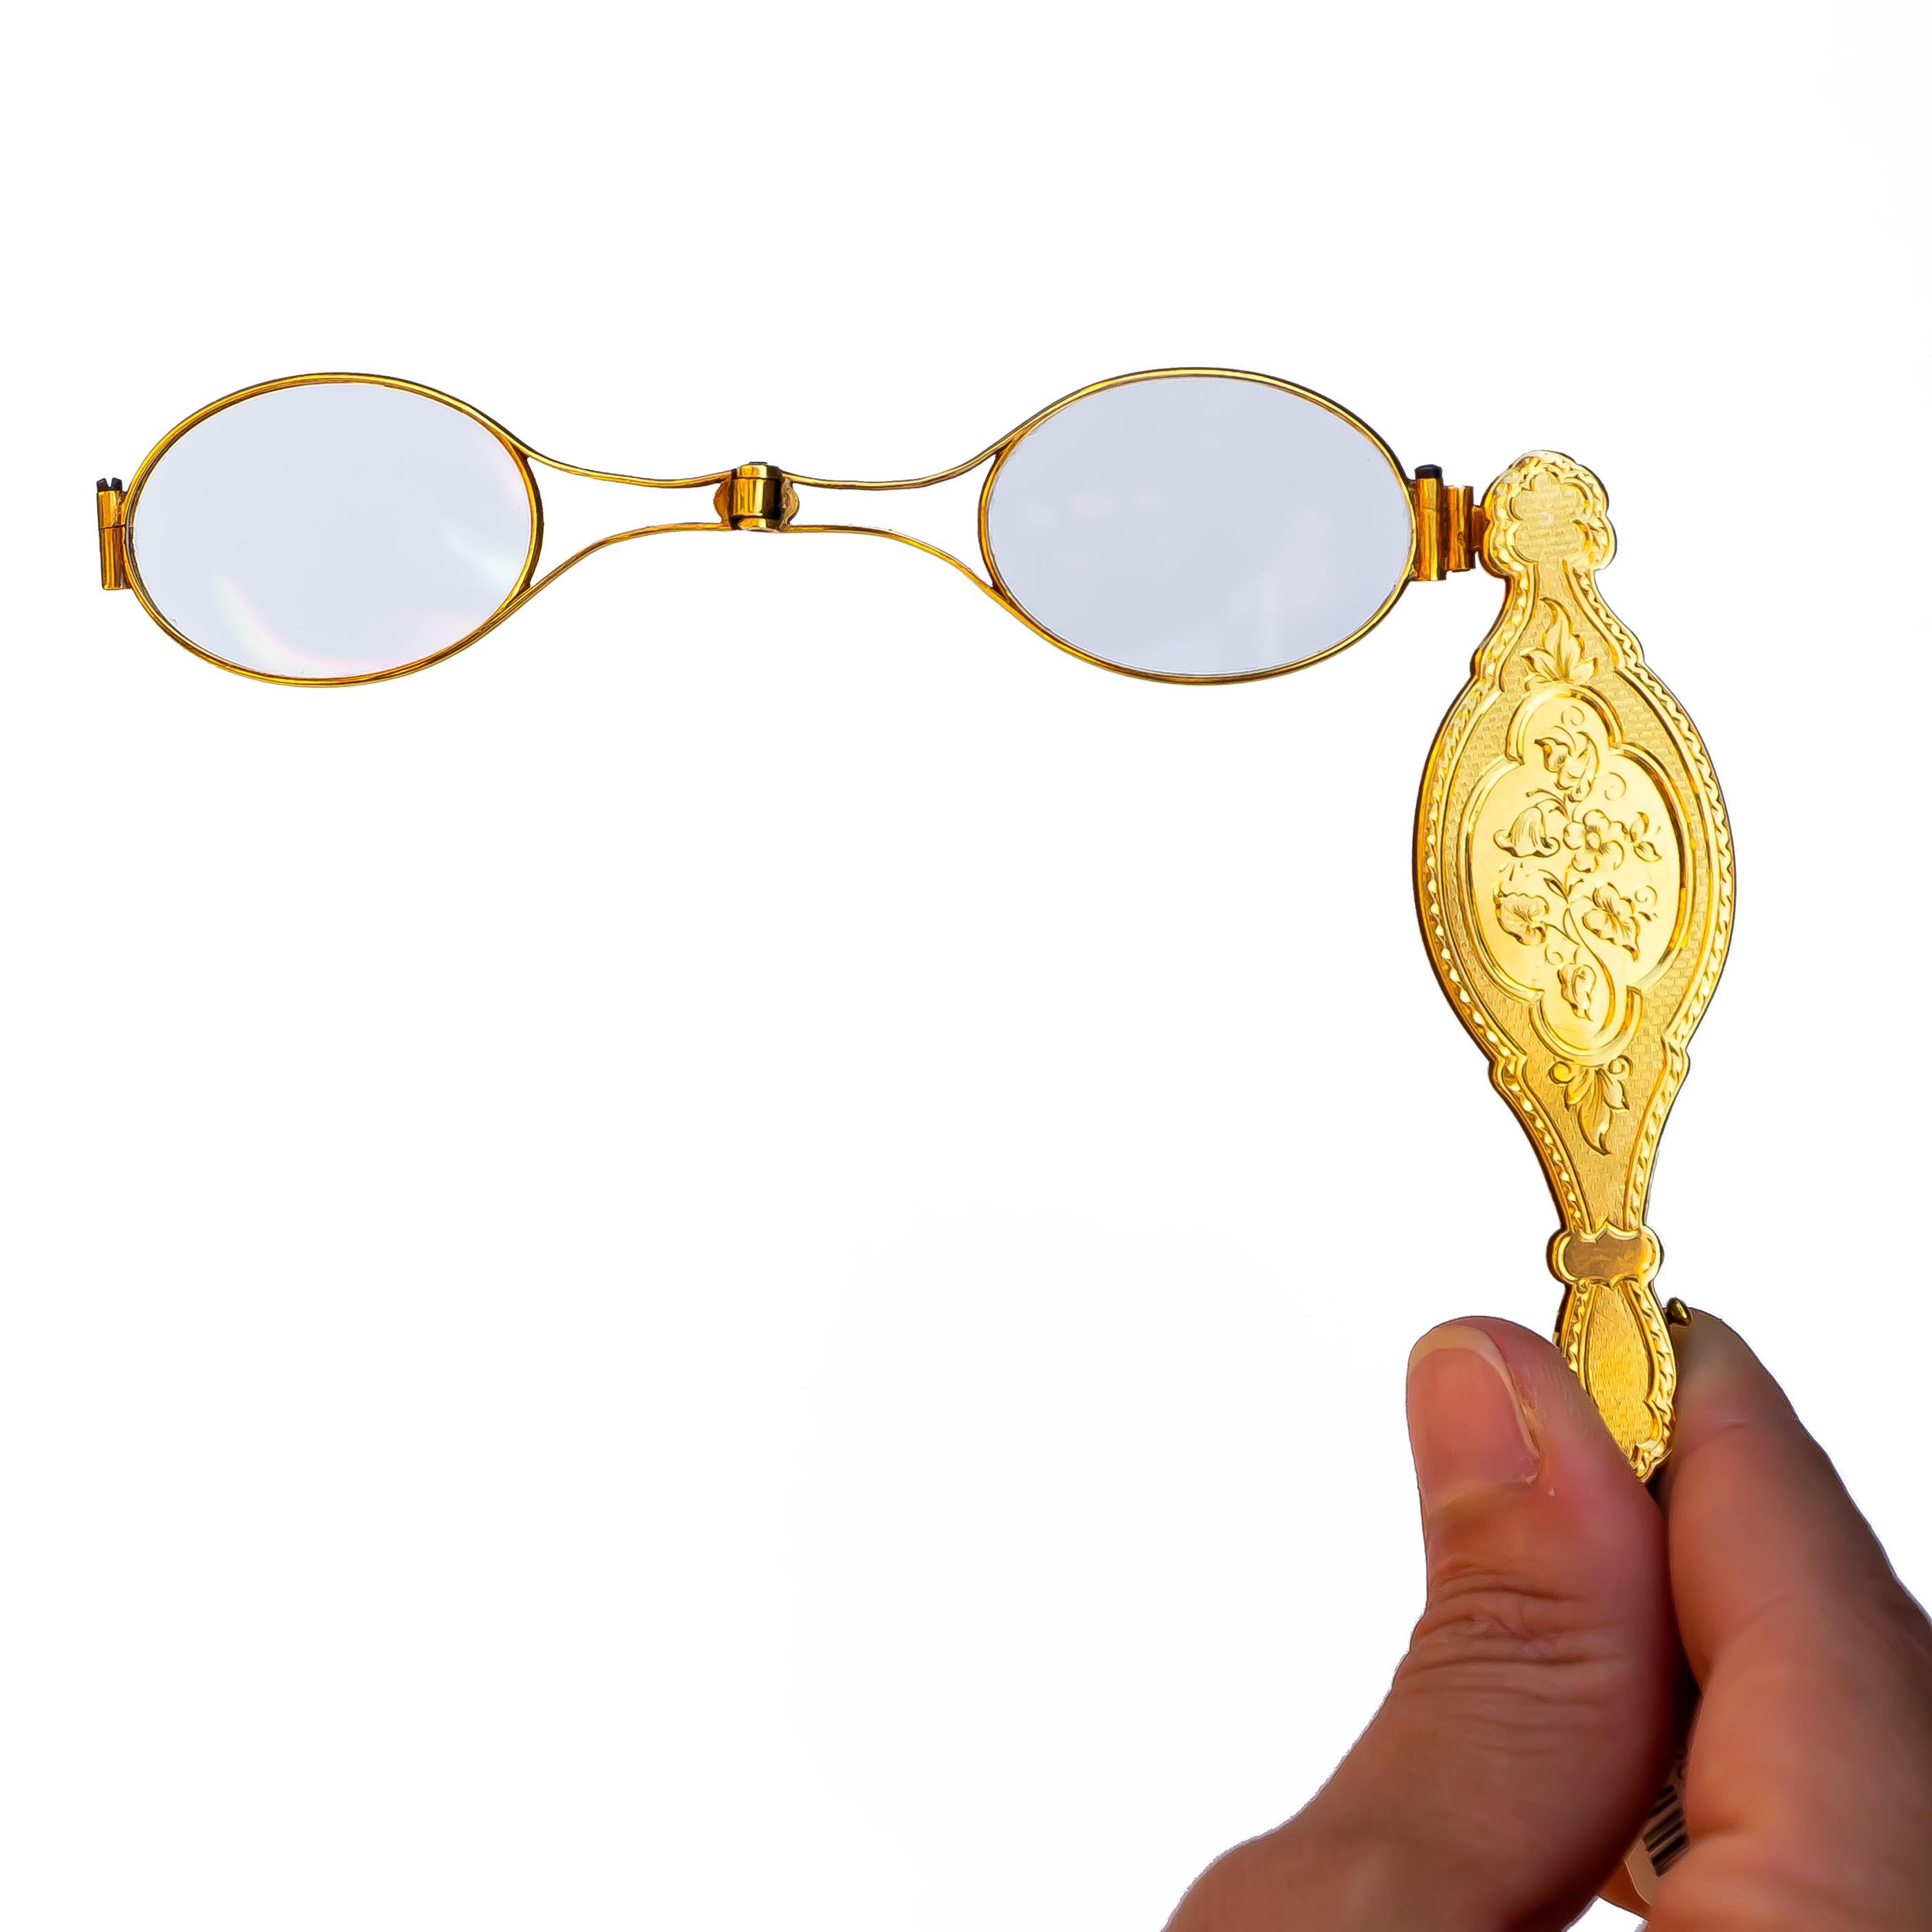 Victorian Lorgnette - was usually used as a piece of jewelry, rather than to enhance vision. Fashionable ladies usually preferred them to spectacles. These were very popular at masquerade parties and used often at the opera.

Metal: 14K Yellow Gold